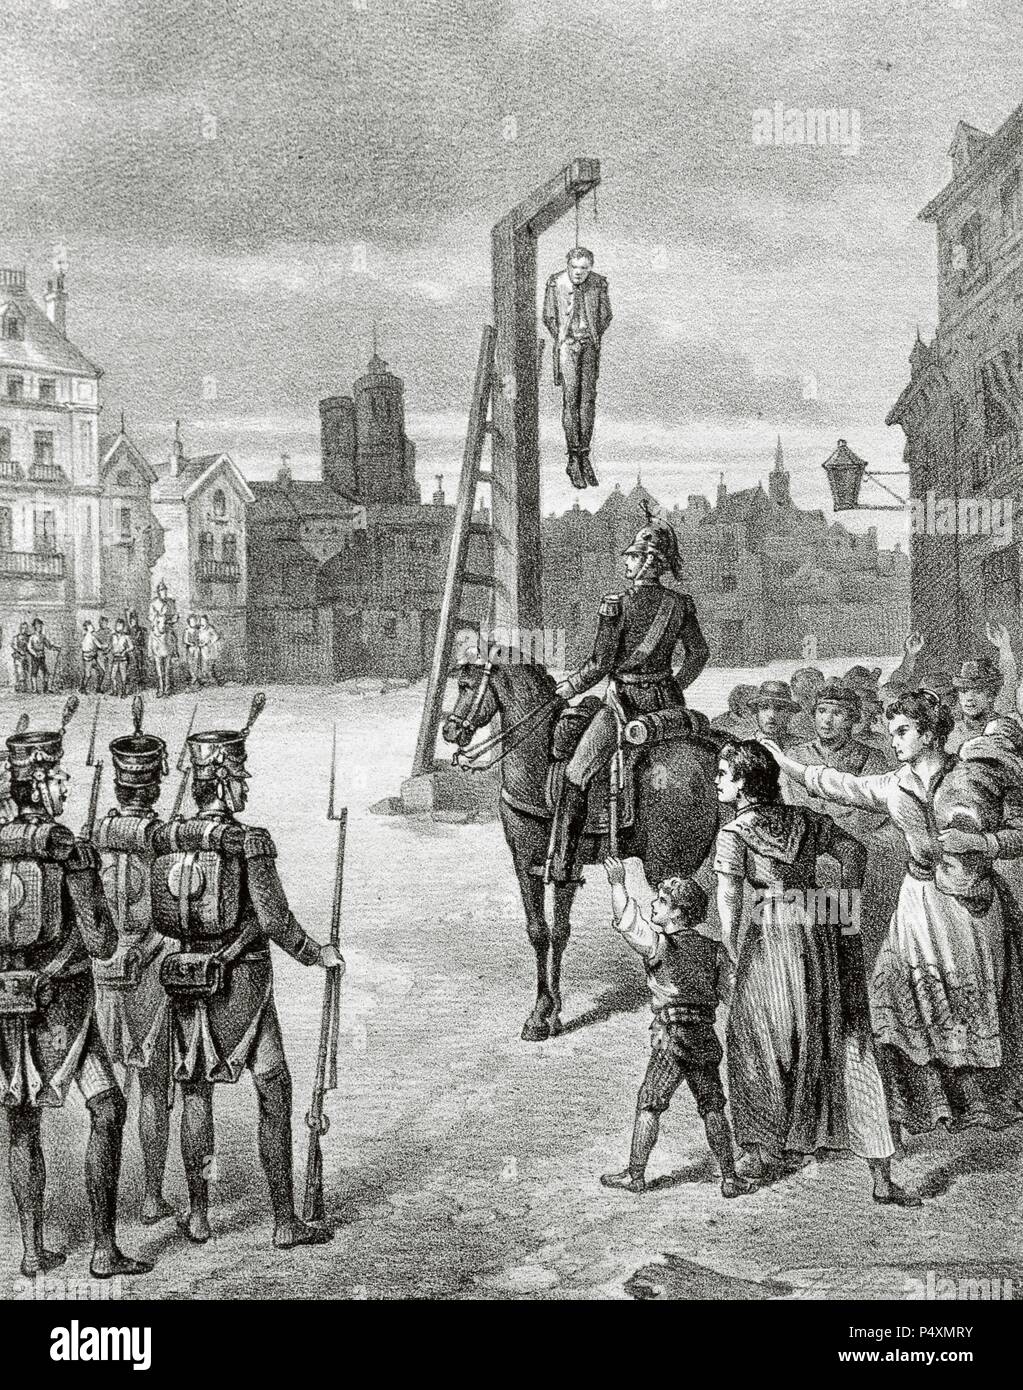 Rafael del Riego (1785-1823). Spanish military and politician. Accused of high treason, he was sentenced to be hanged. Public execution of Riego in the Cebada Square, Madrid, on 7th November, 1823. Spain. Engraving. Stock Photo